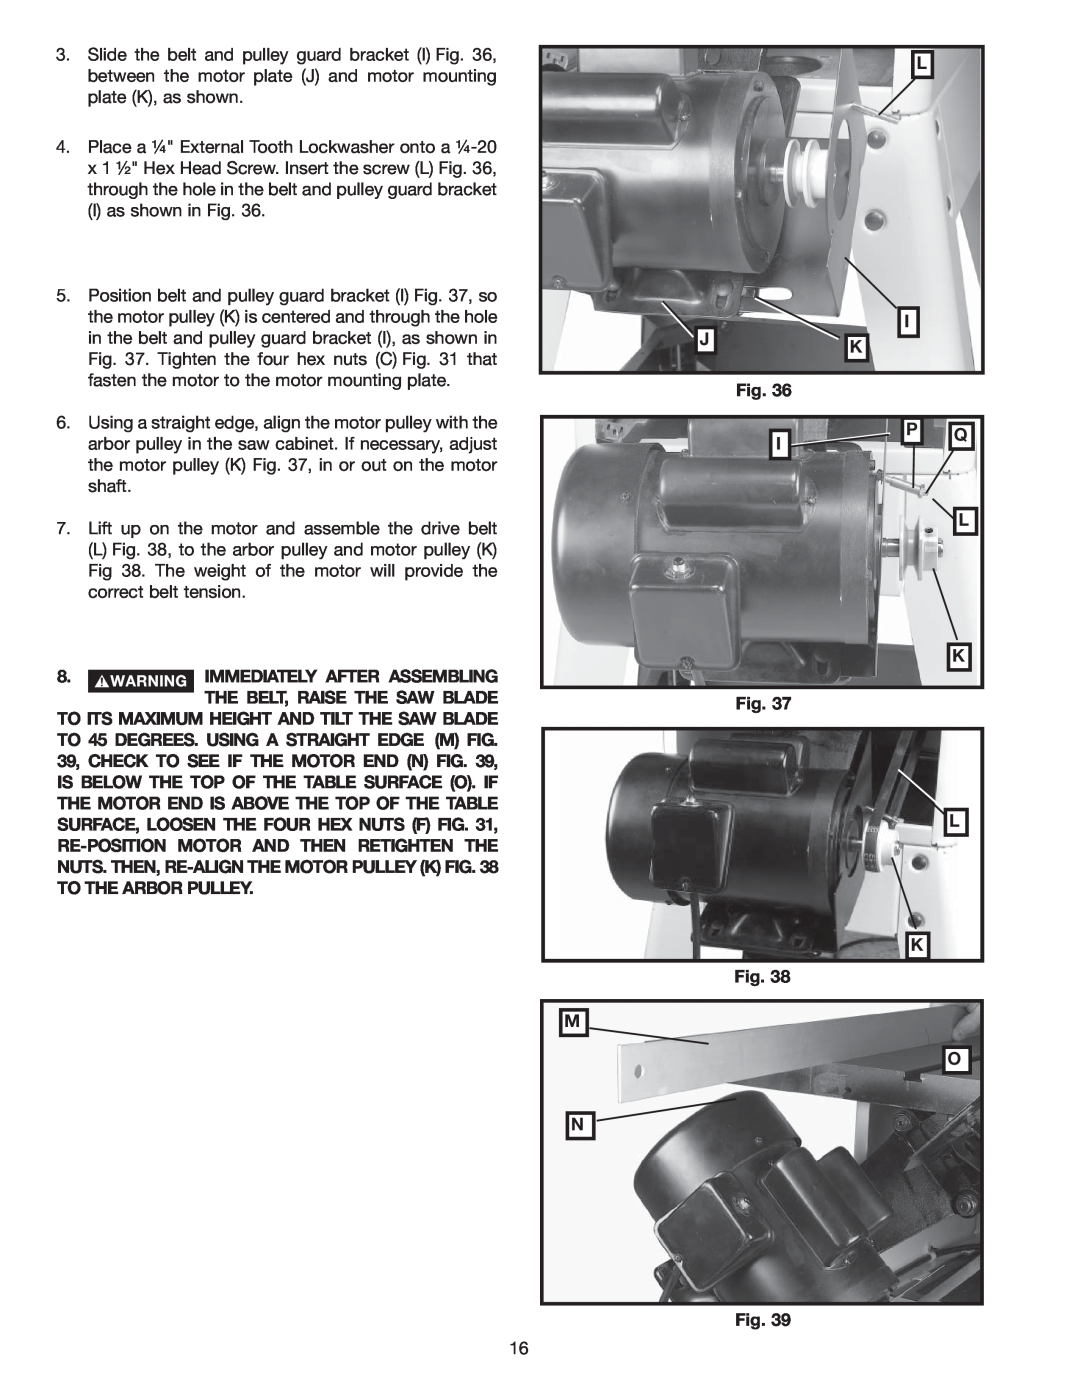 Delta 36-978 instruction manual Place a ¼ External Tooth Lockwasher onto a ¼-20 